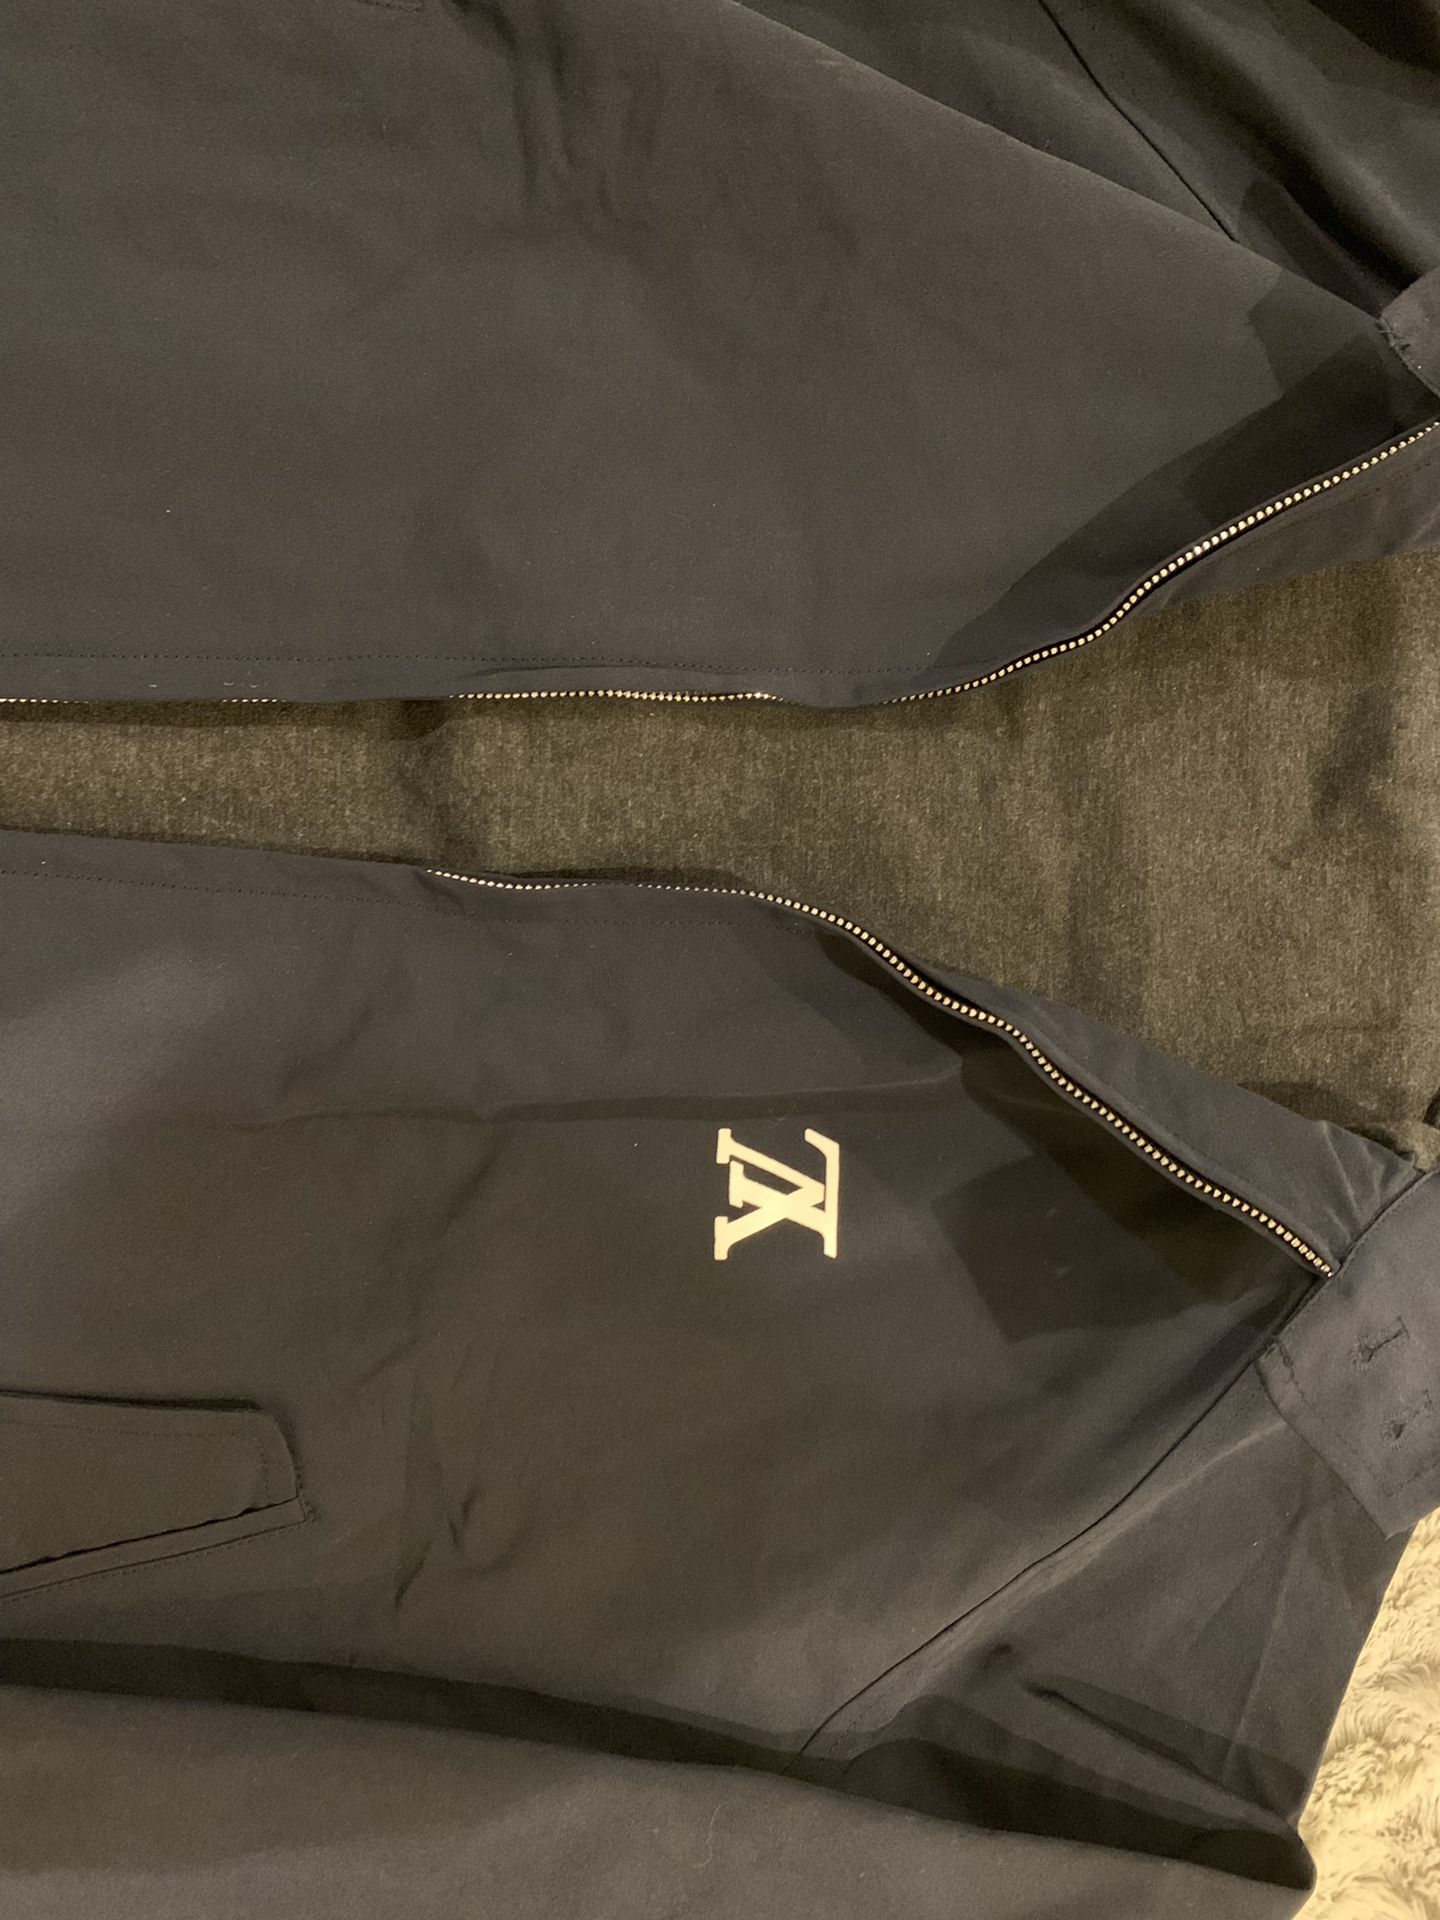 Louis Vuitton love and peace jacket retail 3000$ for Sale in Philadelphia,  PA - OfferUp